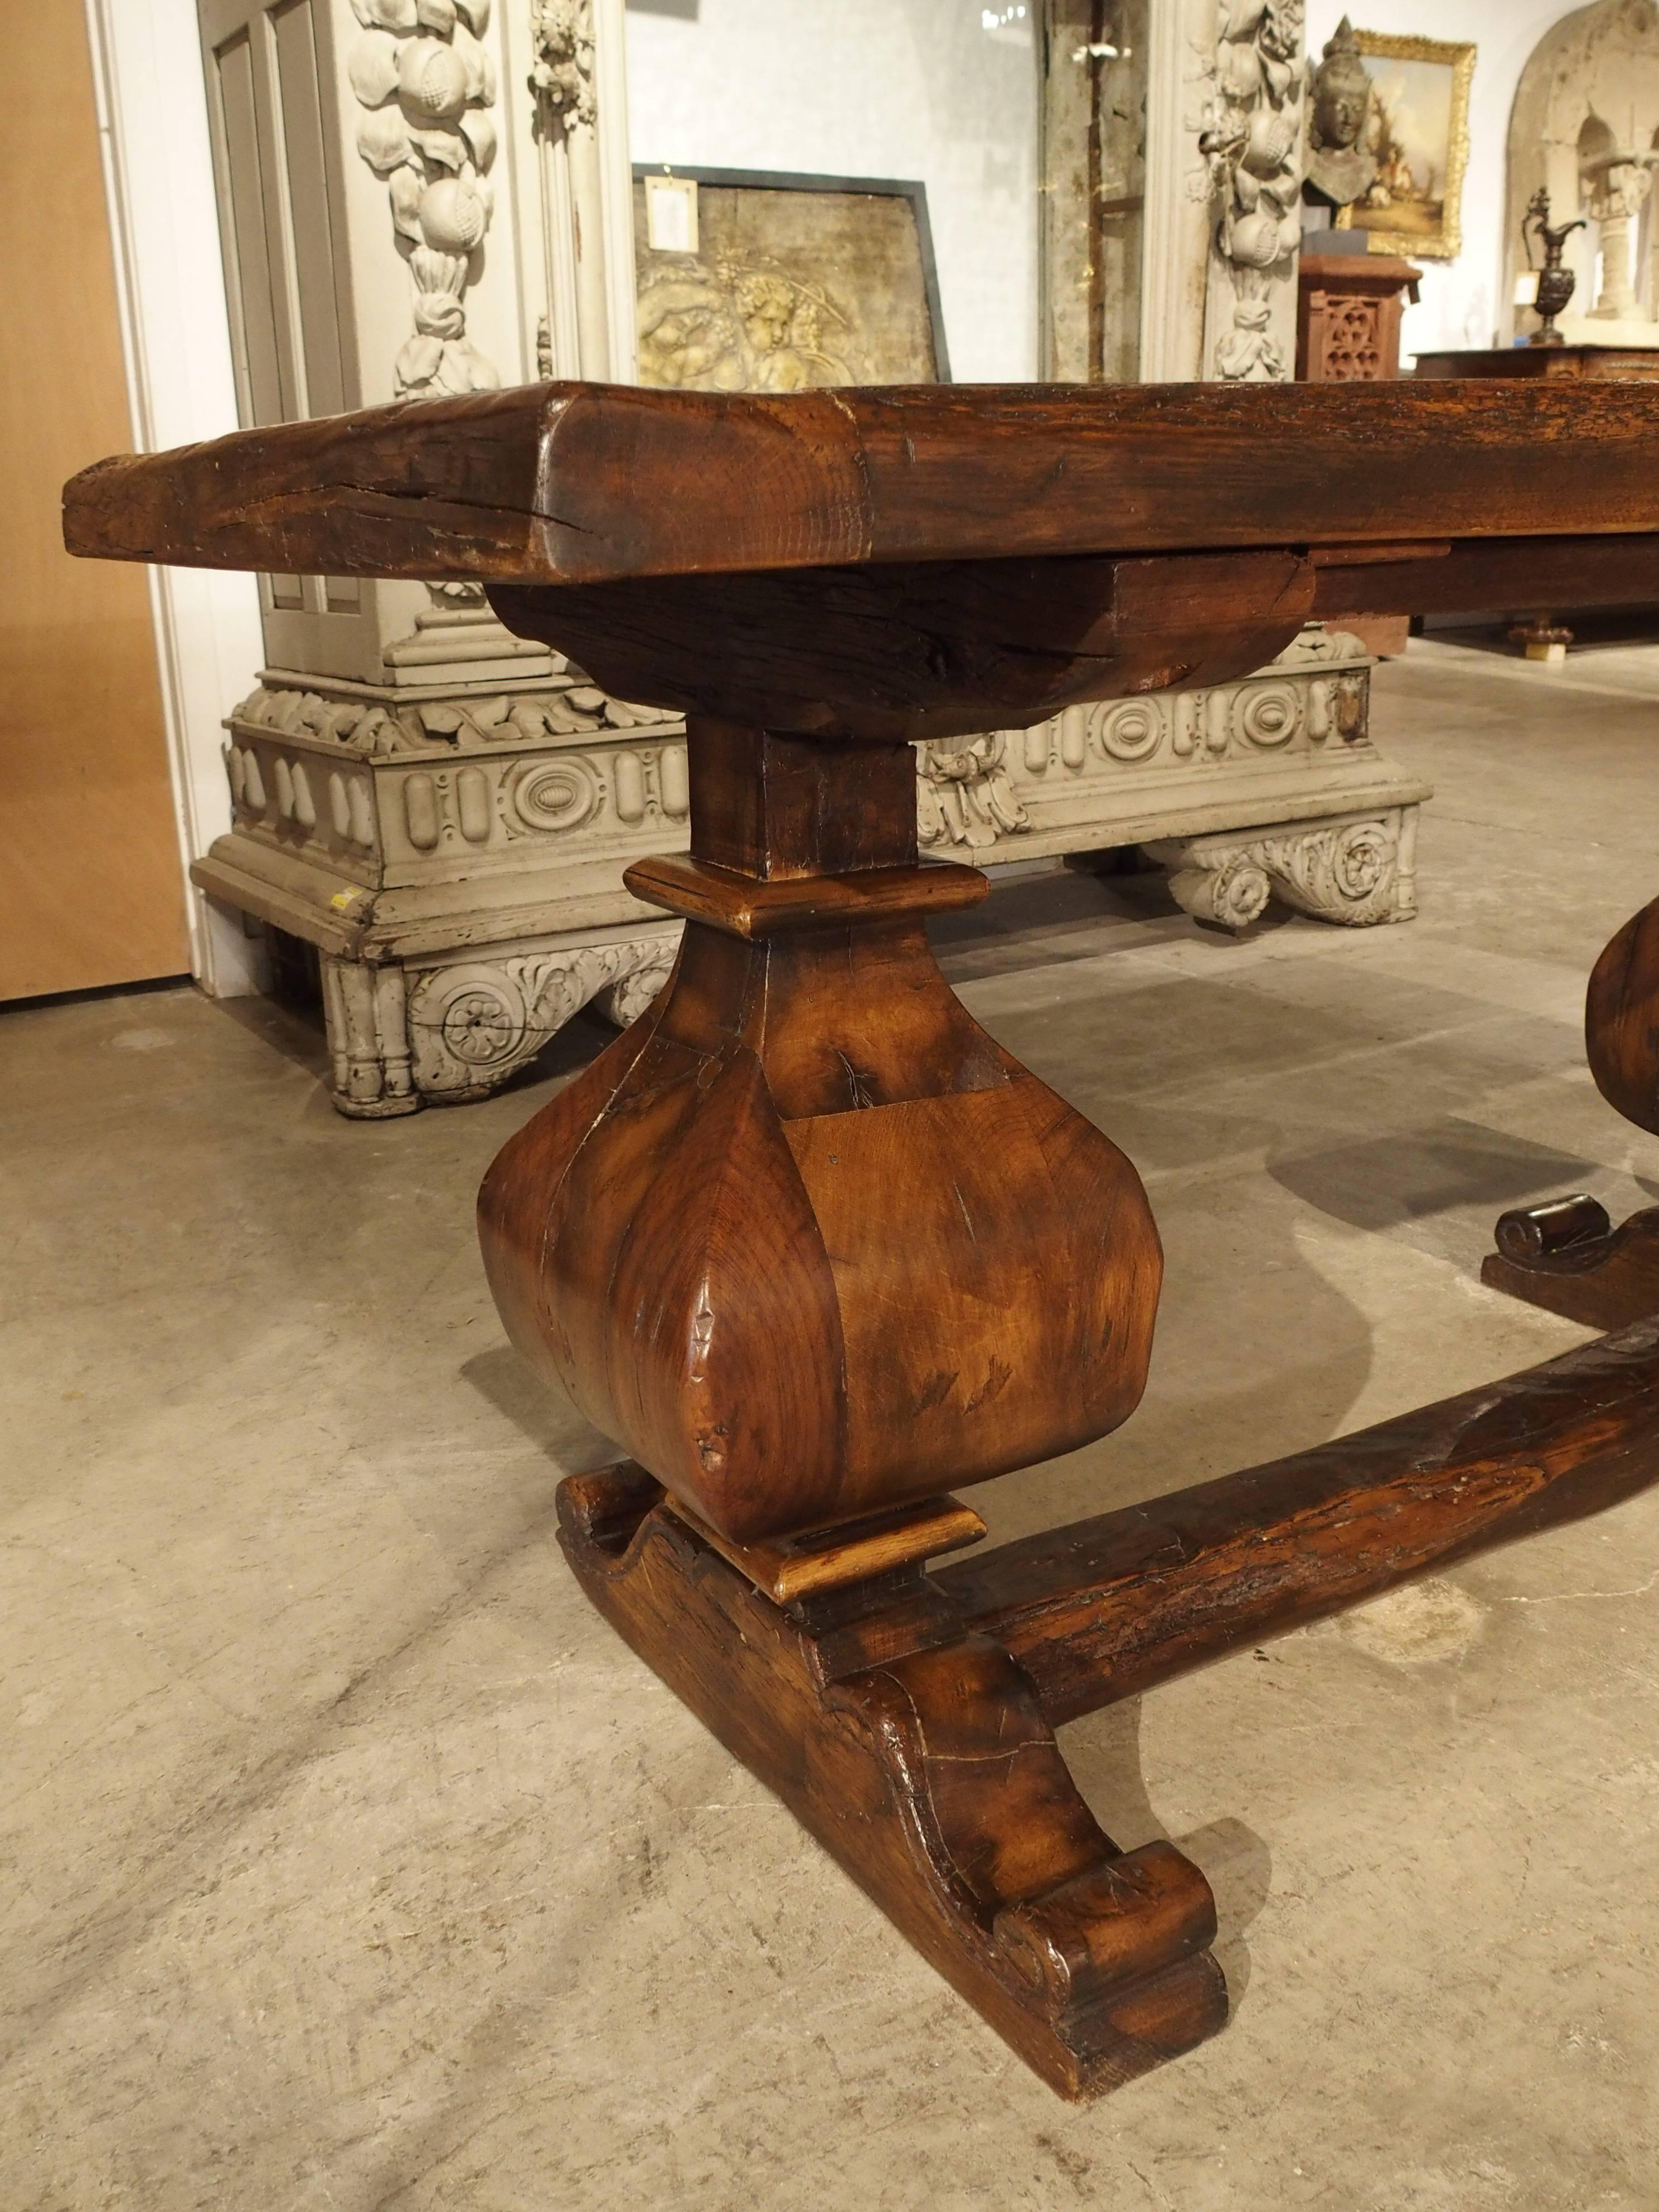 This magnificent French oak sofa table was made with a thick slab of uneven parquet flooring and beam for the stretcher. The baluster shaped legs were more recently carved, and the volute feet are in the French Renaissance style. When a quality